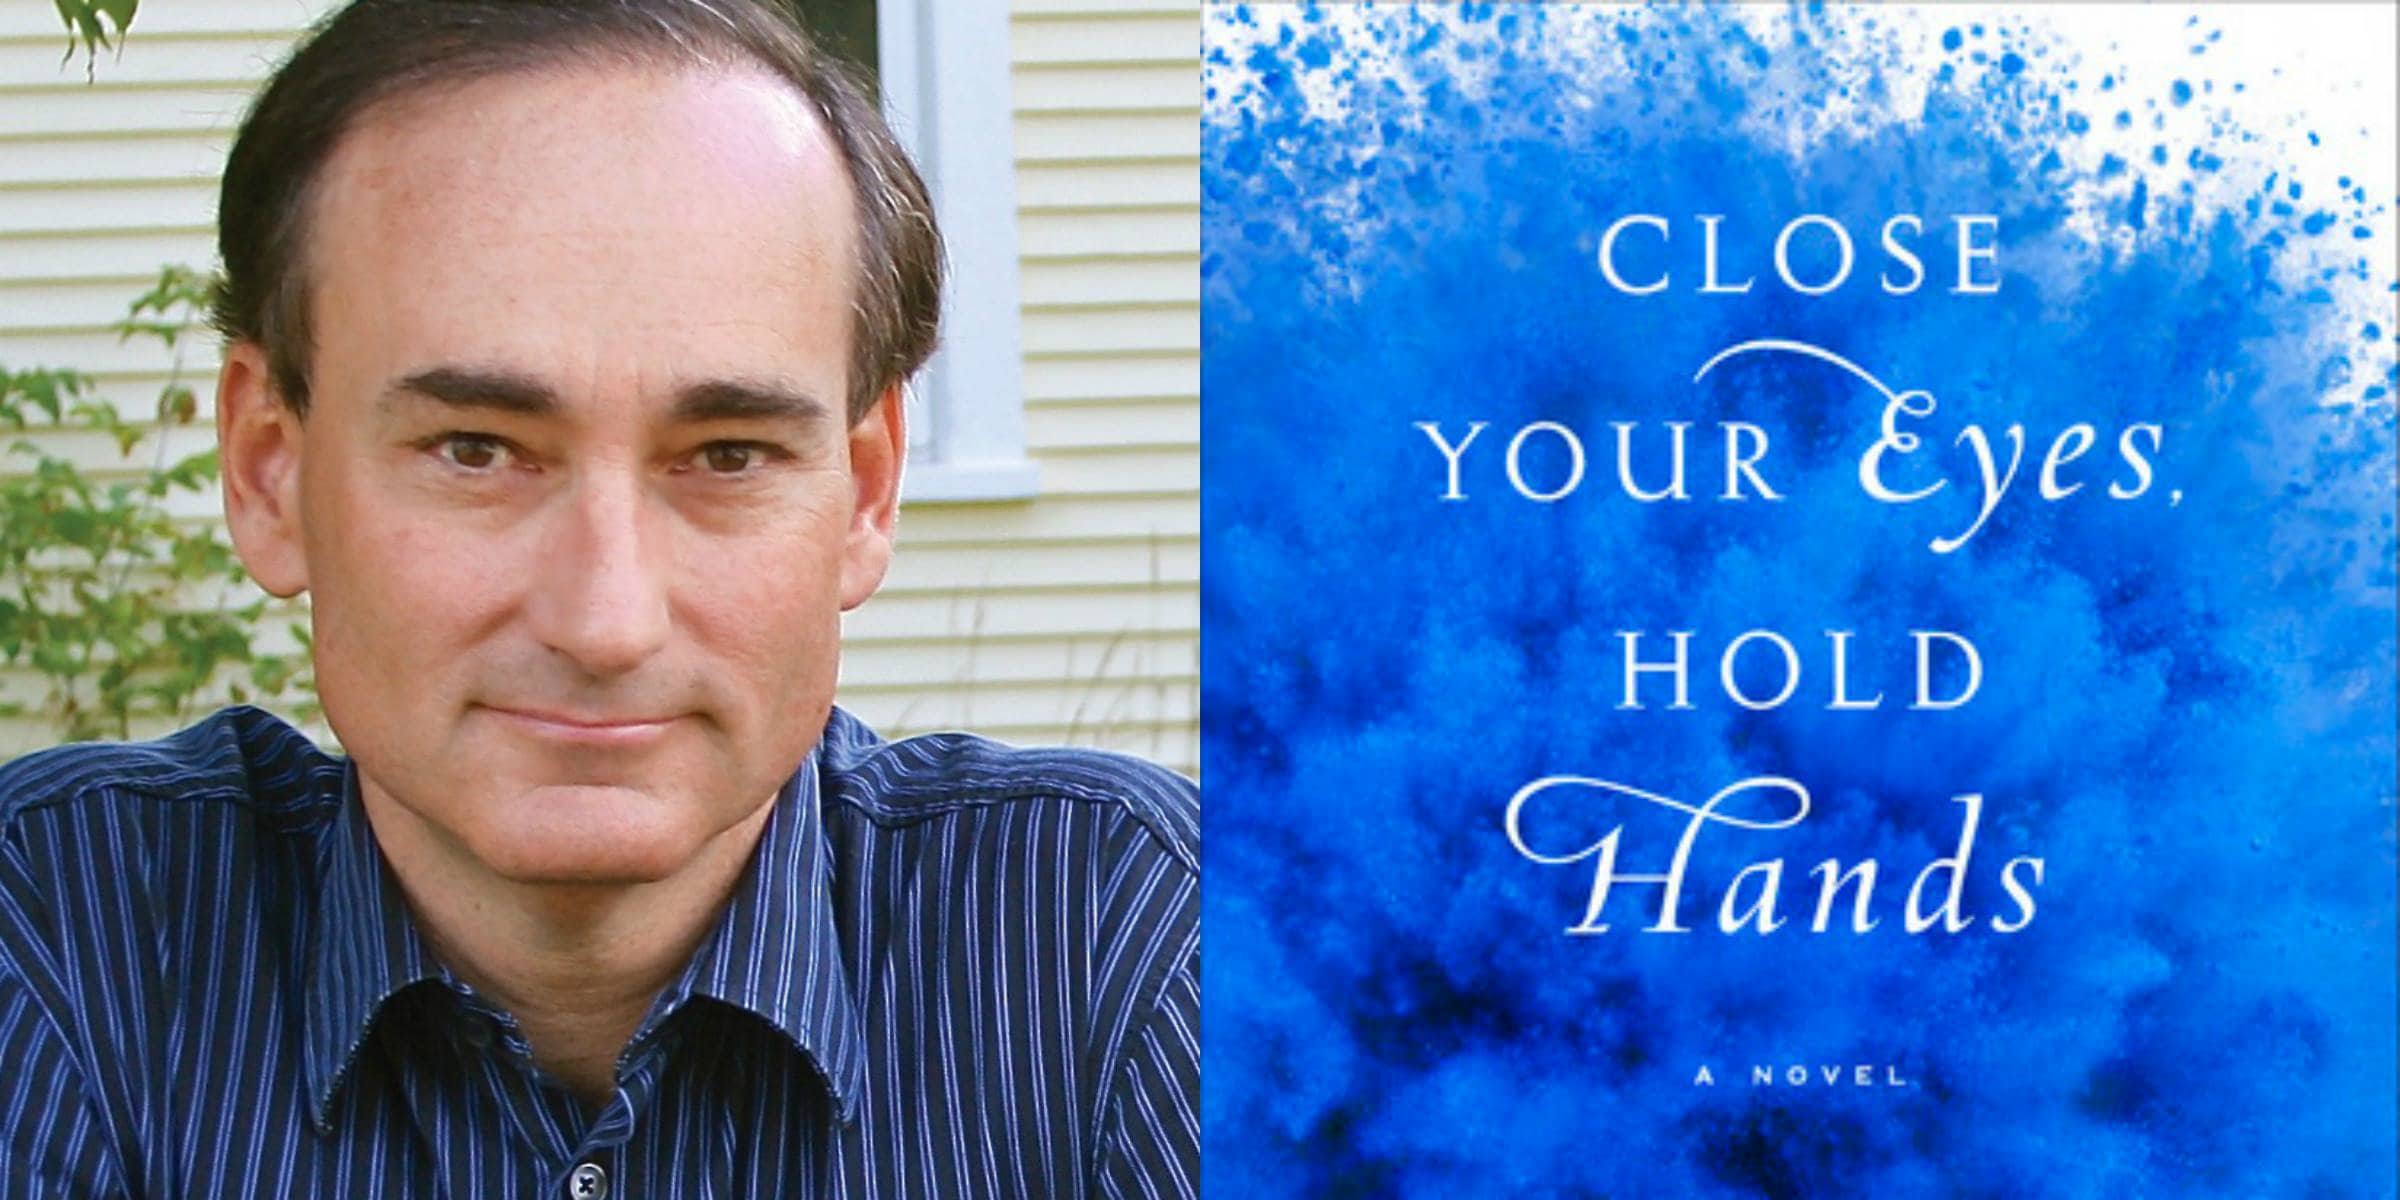 Sundays With Writers: Close Your Eyes, Hold Hands by Chris ...